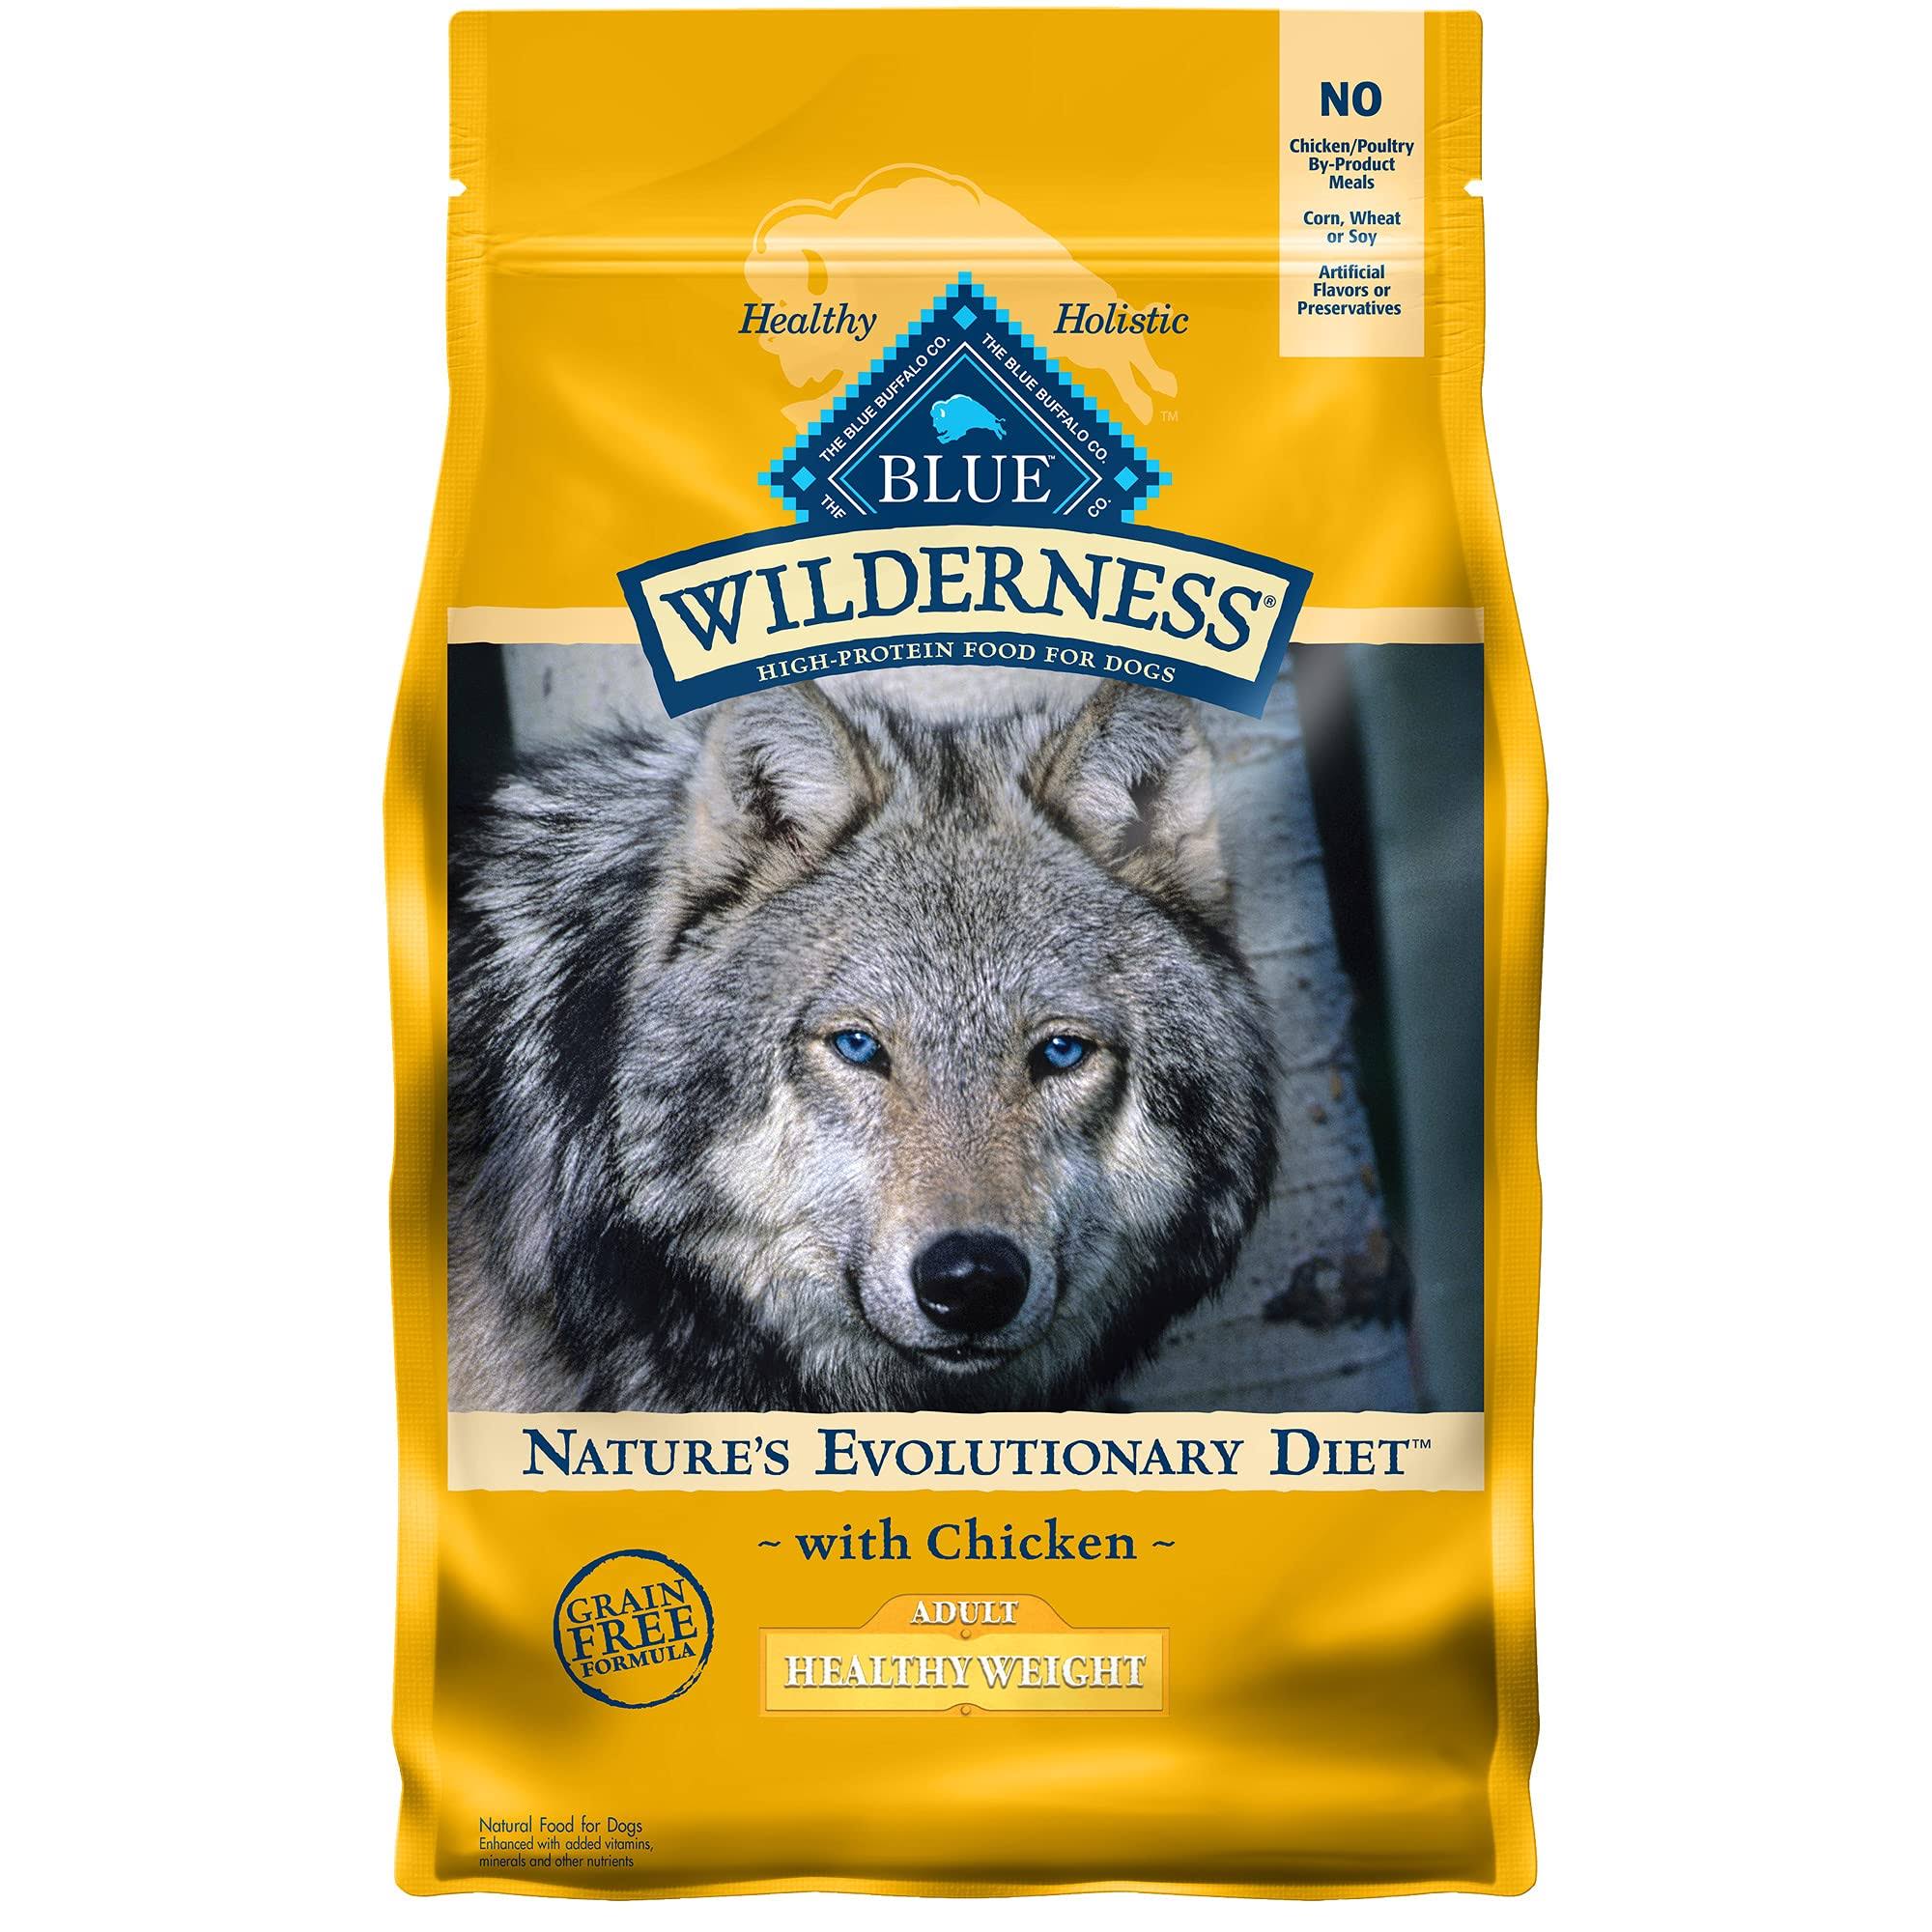 Blue Buffalo Wilderness Healthy Weight Adult Dry Dog Food - Chicken, 4.5lb